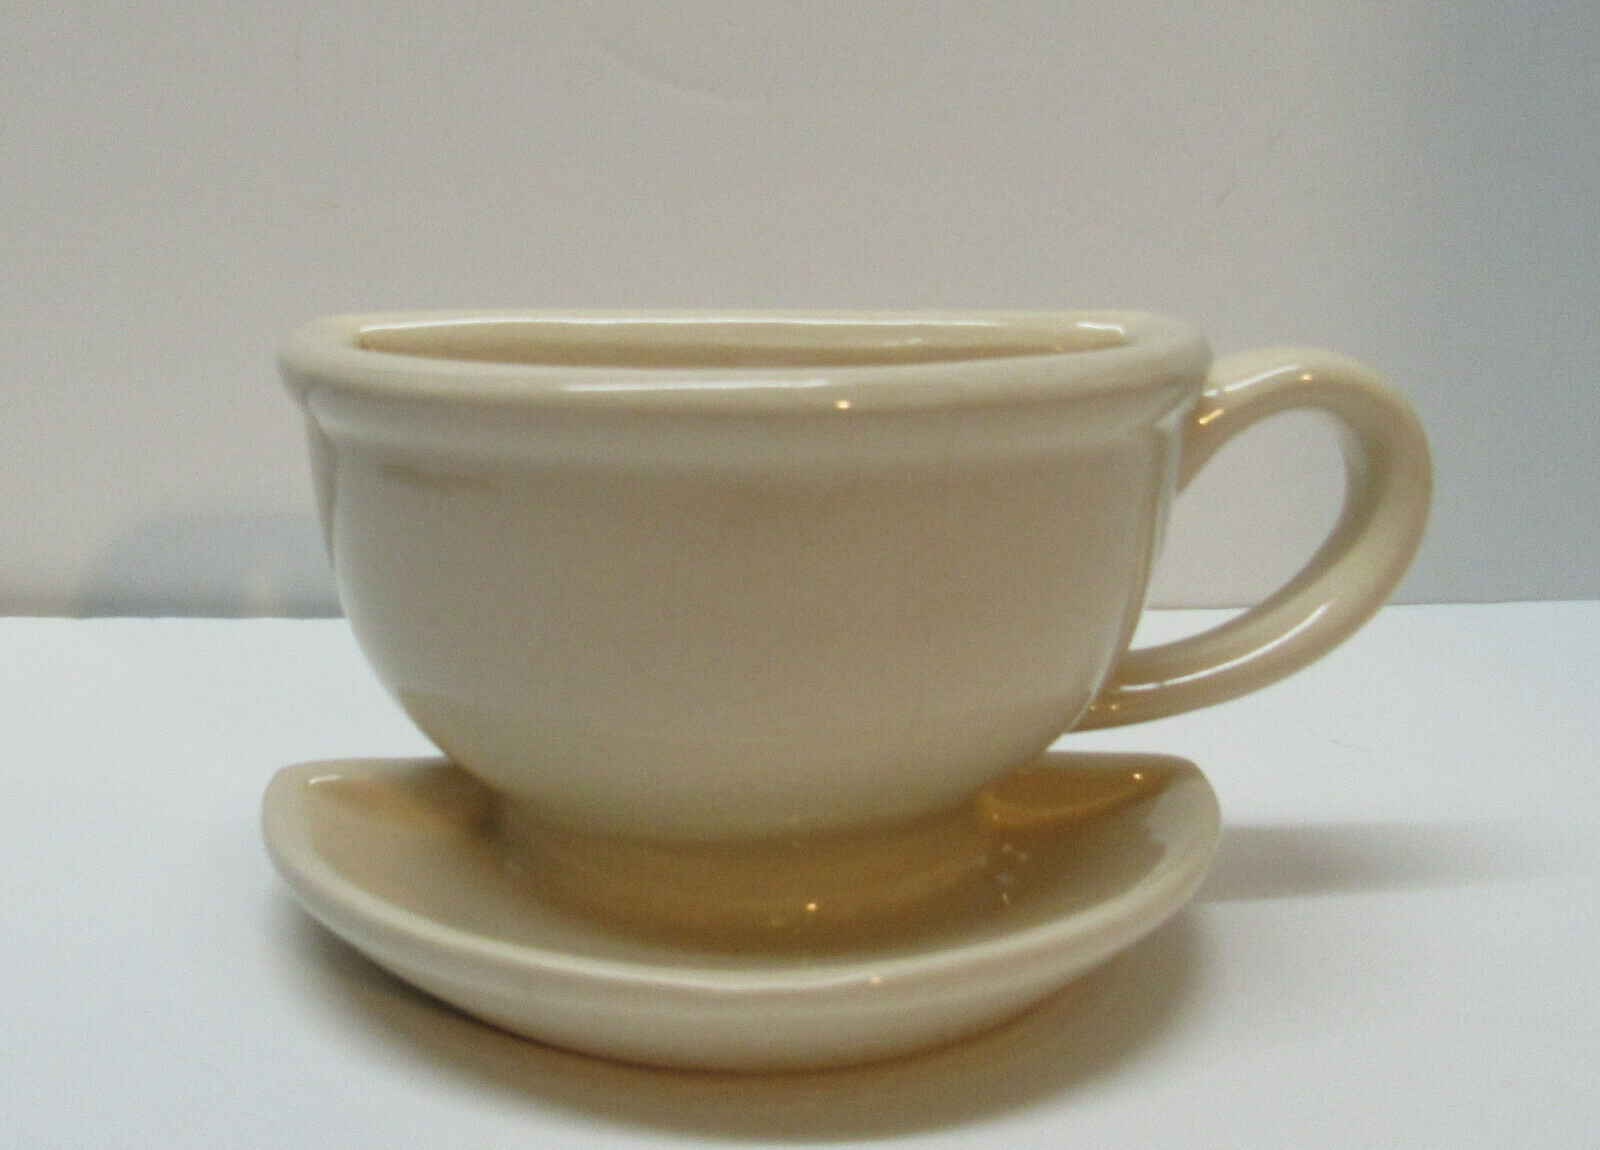 Teacup Coffee and Saucer Wall Pocket Cream or Off White Color Ceramic